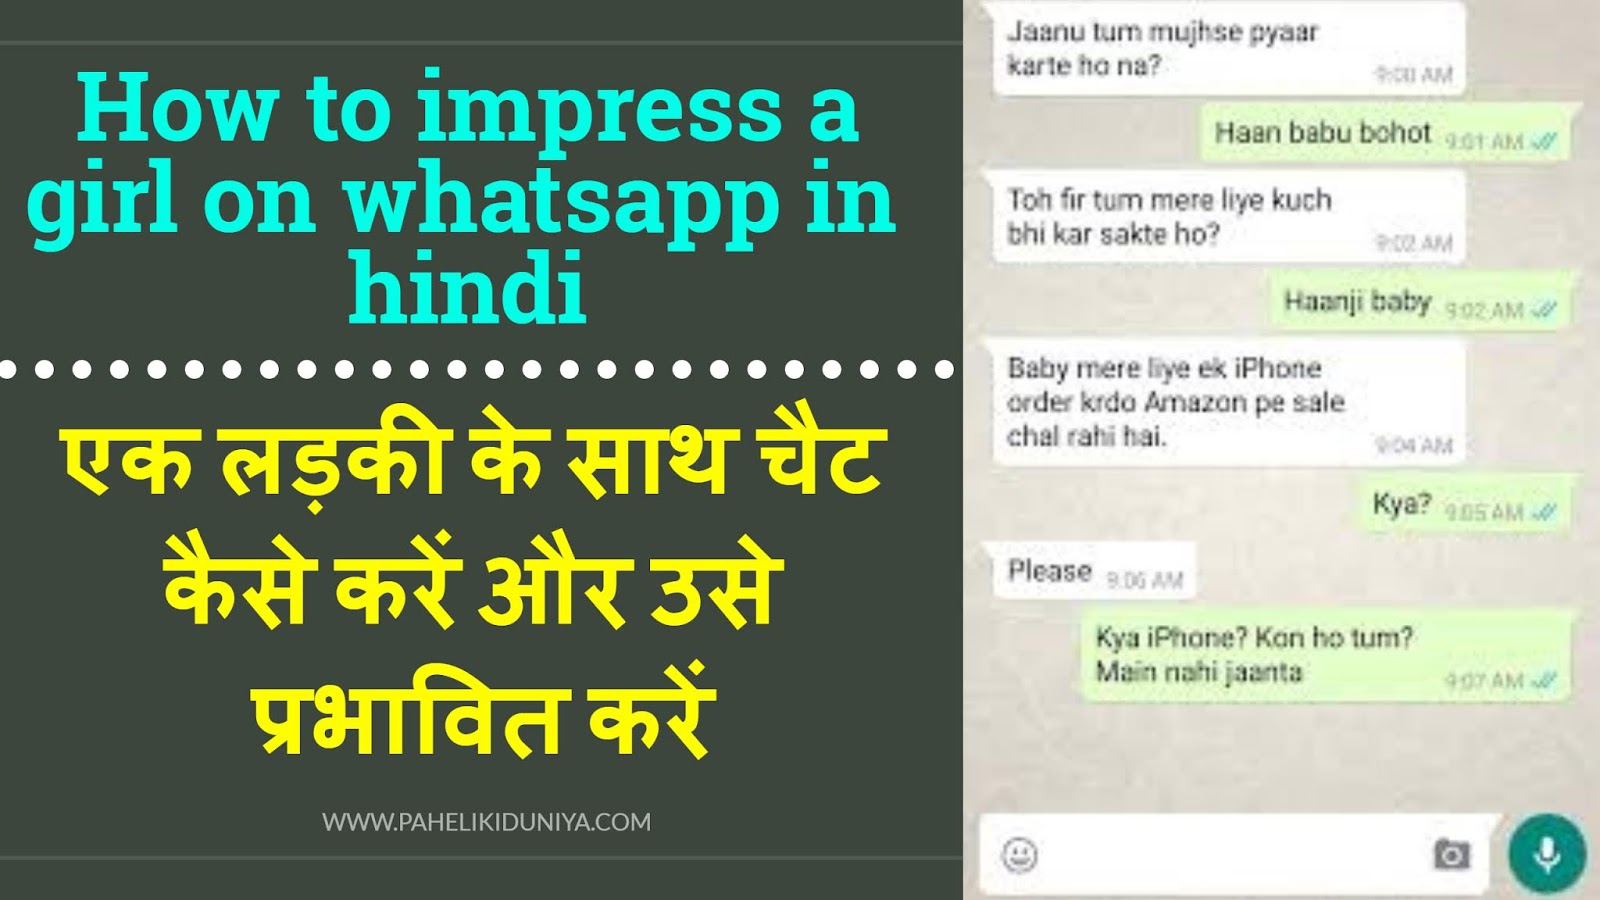 how to chat with a girl and impress her - WhatsApp flirt message - how to i...